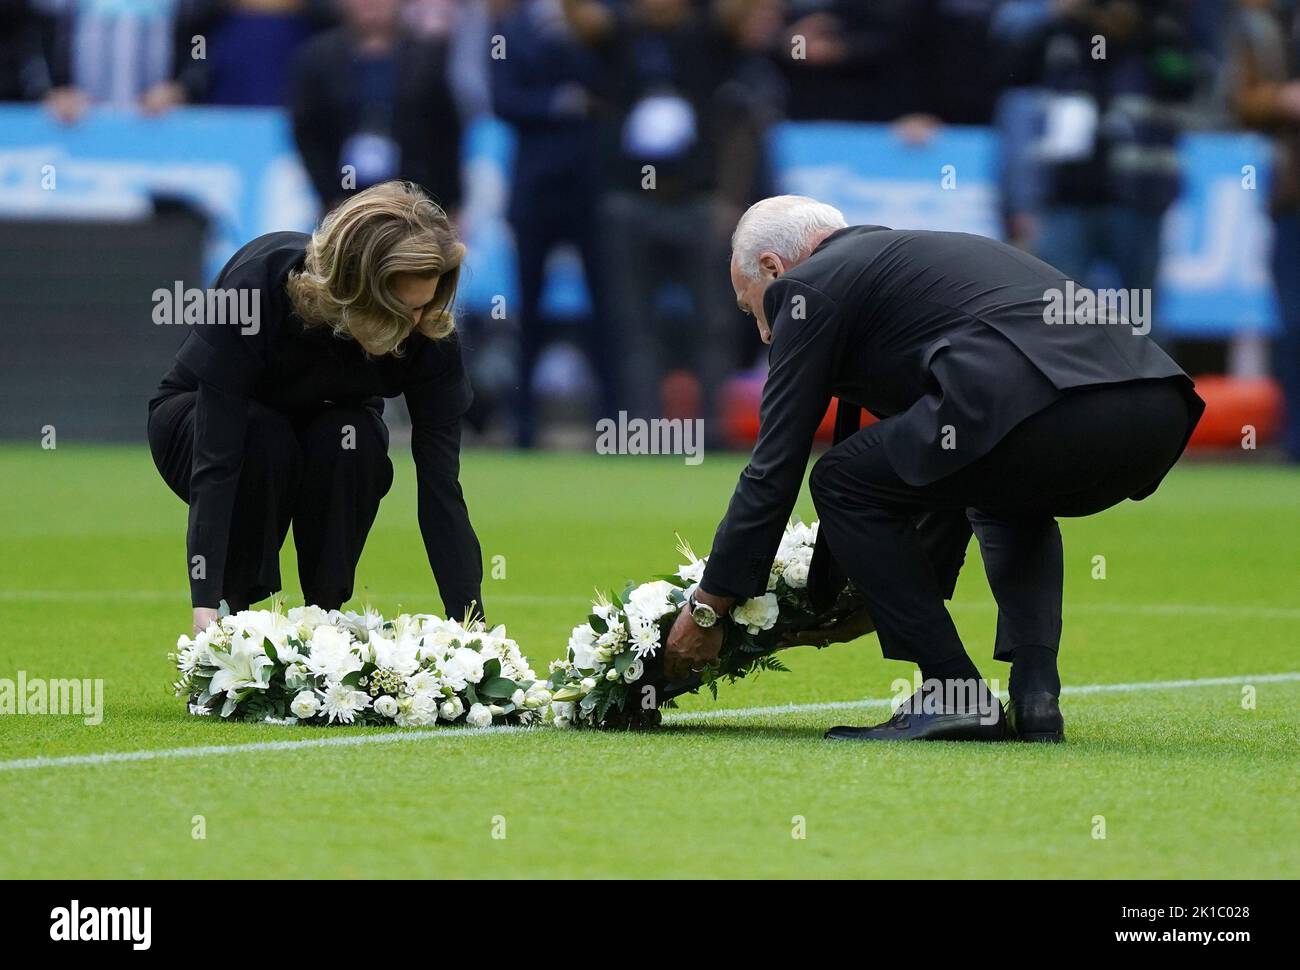 Chairman of AFC Bournemouth Jeff Mostyn and Newcastle United's co-owner Amanda Staveley lay wreaths in memory of Queen Elizabeth II, ahead of the Premier League match at St James' Park, Newcastle. Picture date: Saturday September 17, 2022. Stock Photo